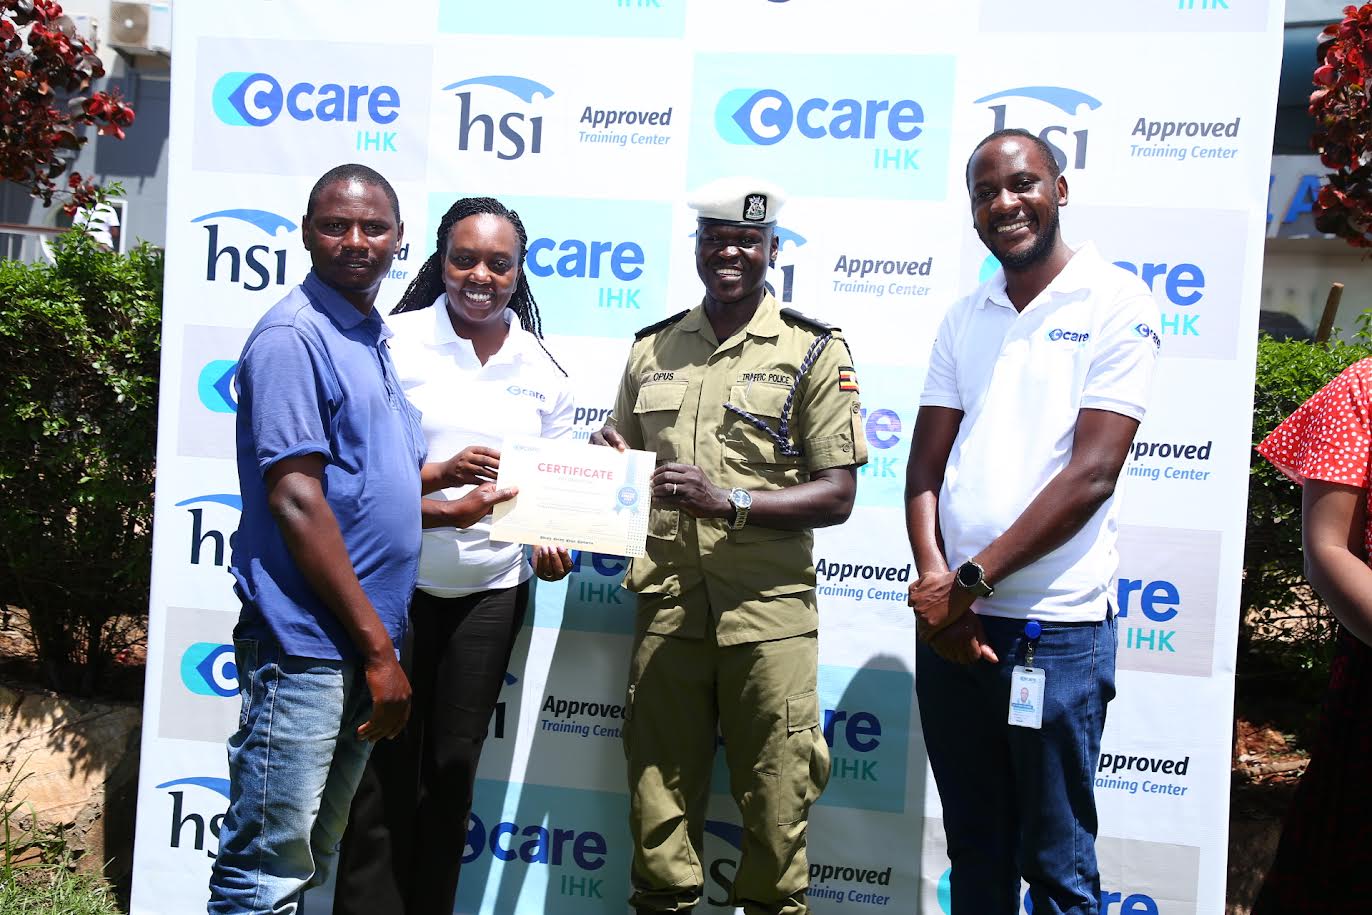 C-Care gets accreditation as training center for first aid and life support in Uganda